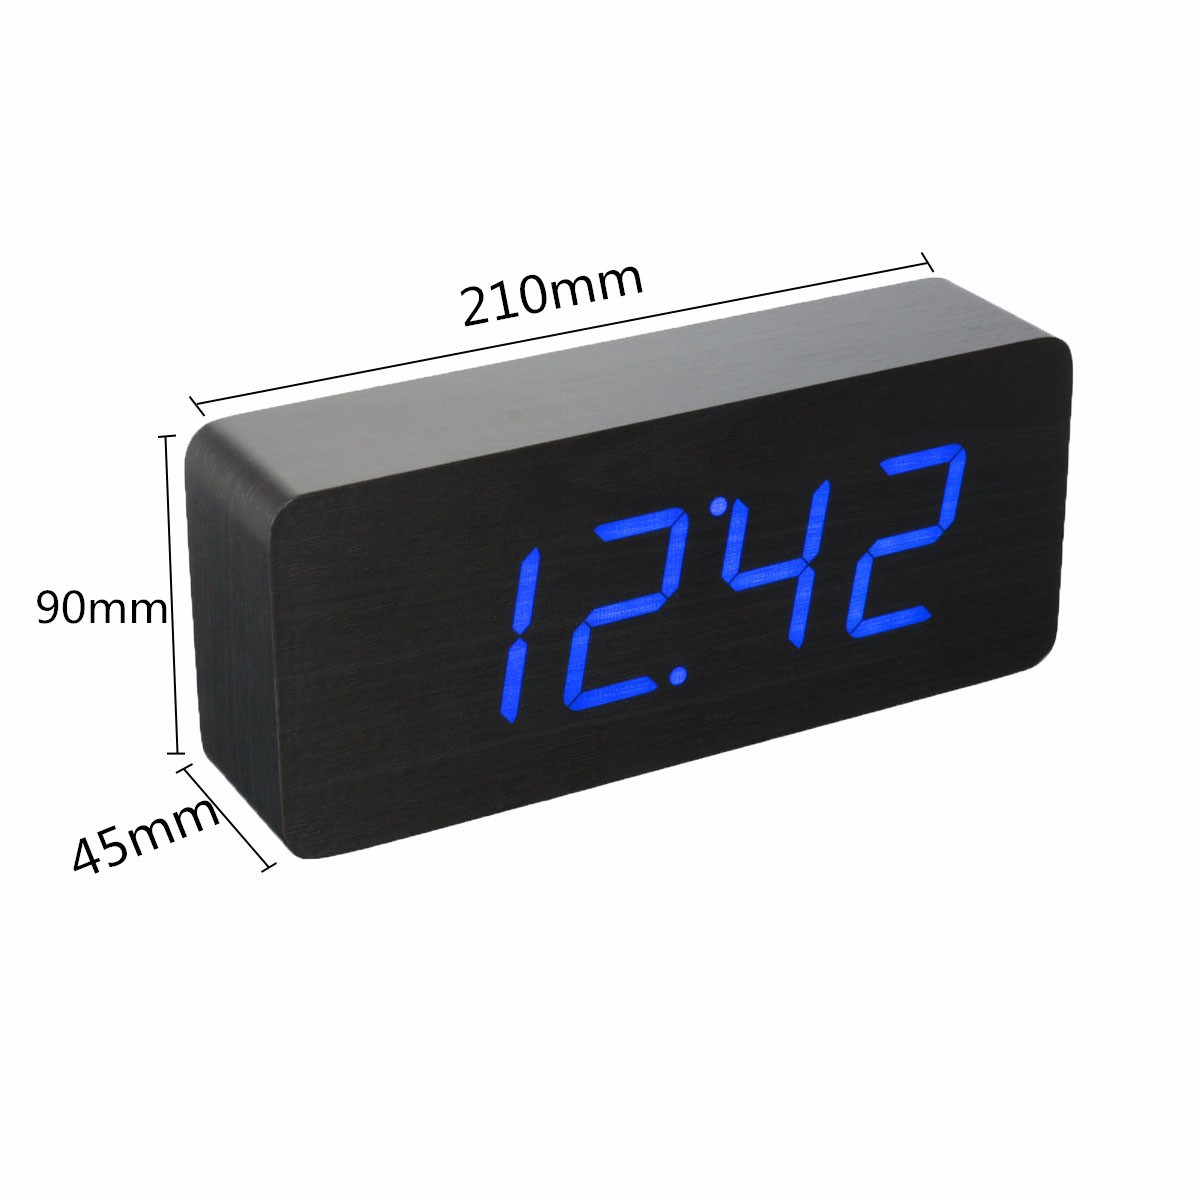 Multifunctional-Wooden-Digital-Clock-Two-Modes-Default-Display-Time-Built-in-Battery-Voice-Control-S-1891907-12